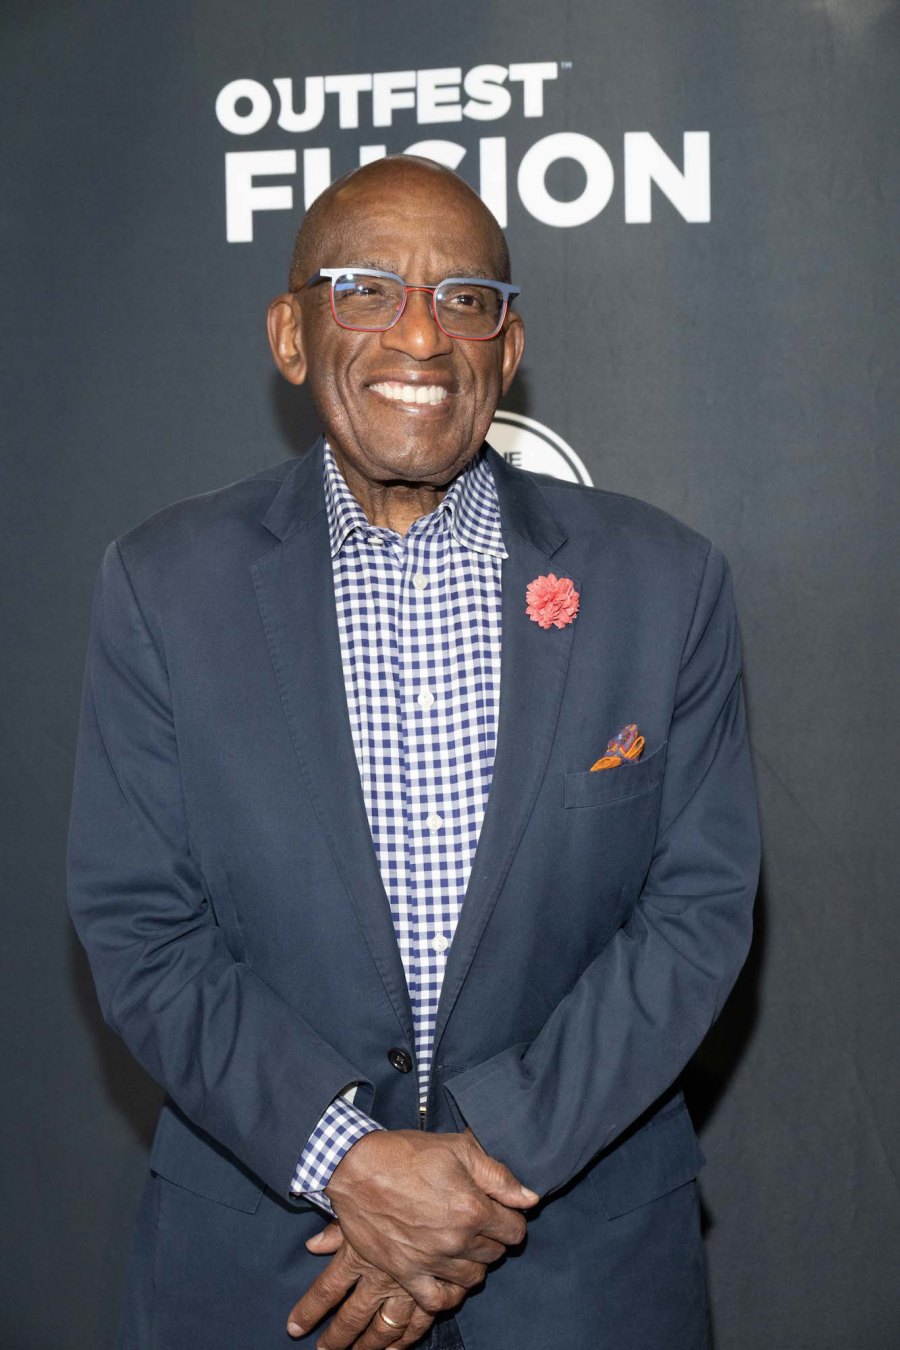 Al Roker Quotes About His Health Ups and Downs